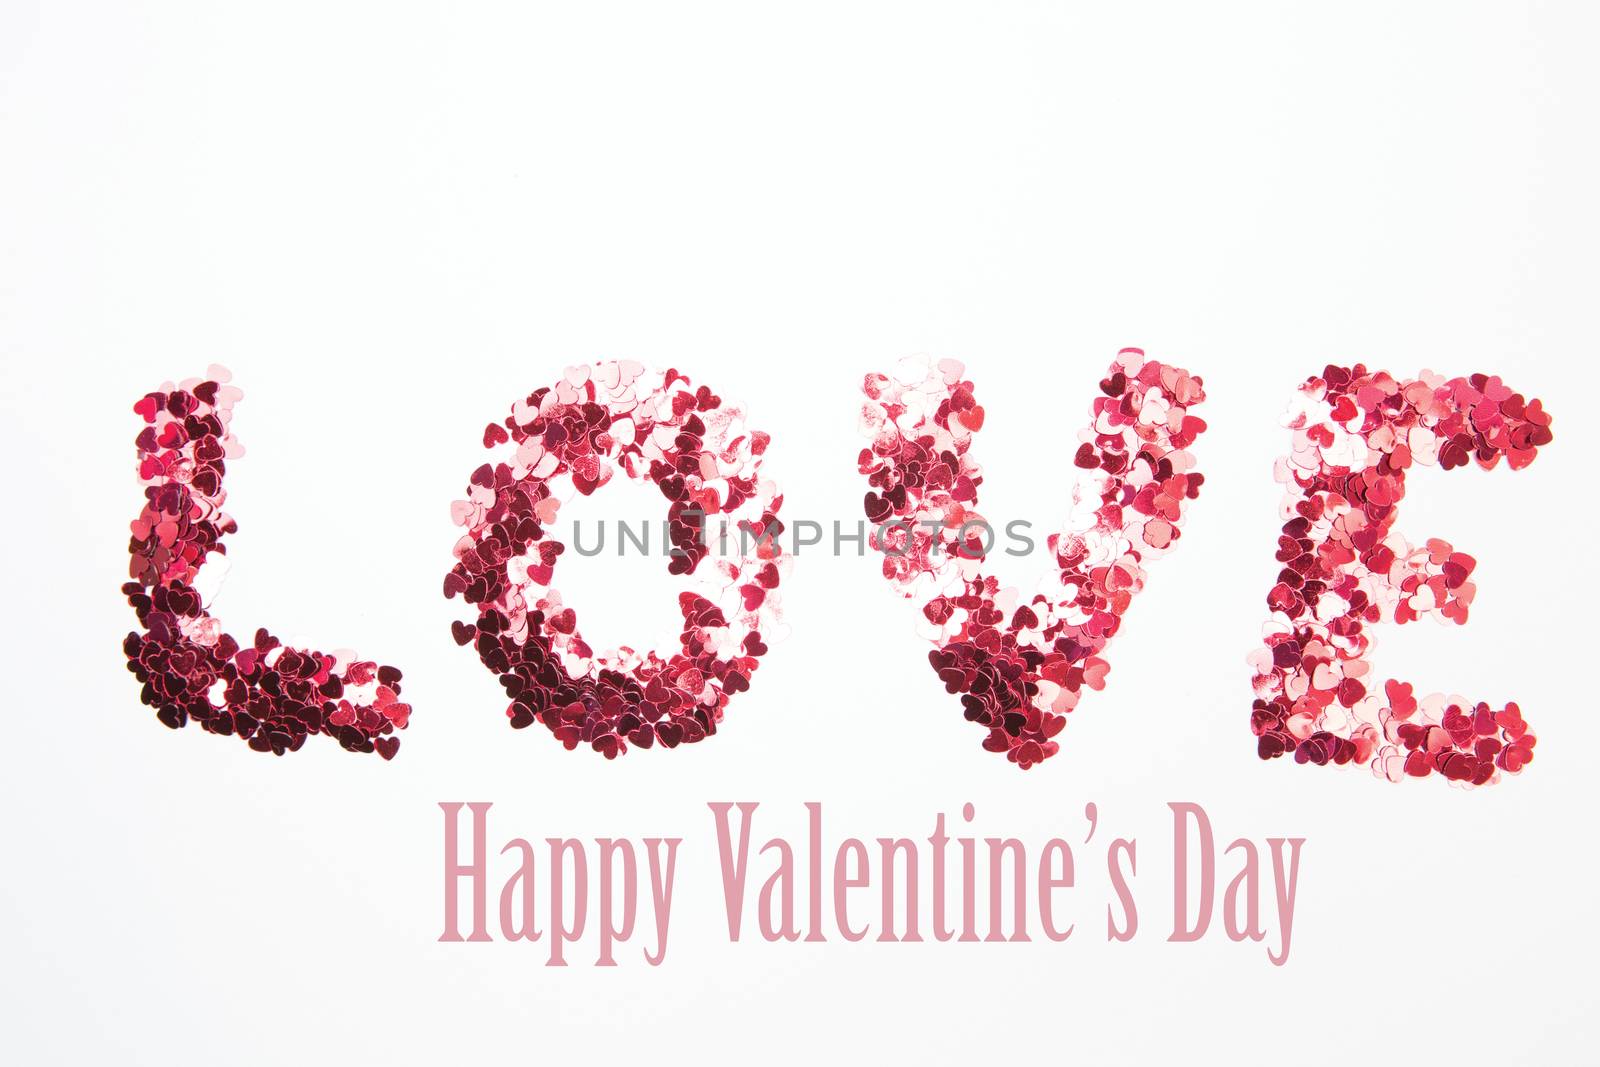 Composite image of pink confetti spelling out love by Wavebreakmedia